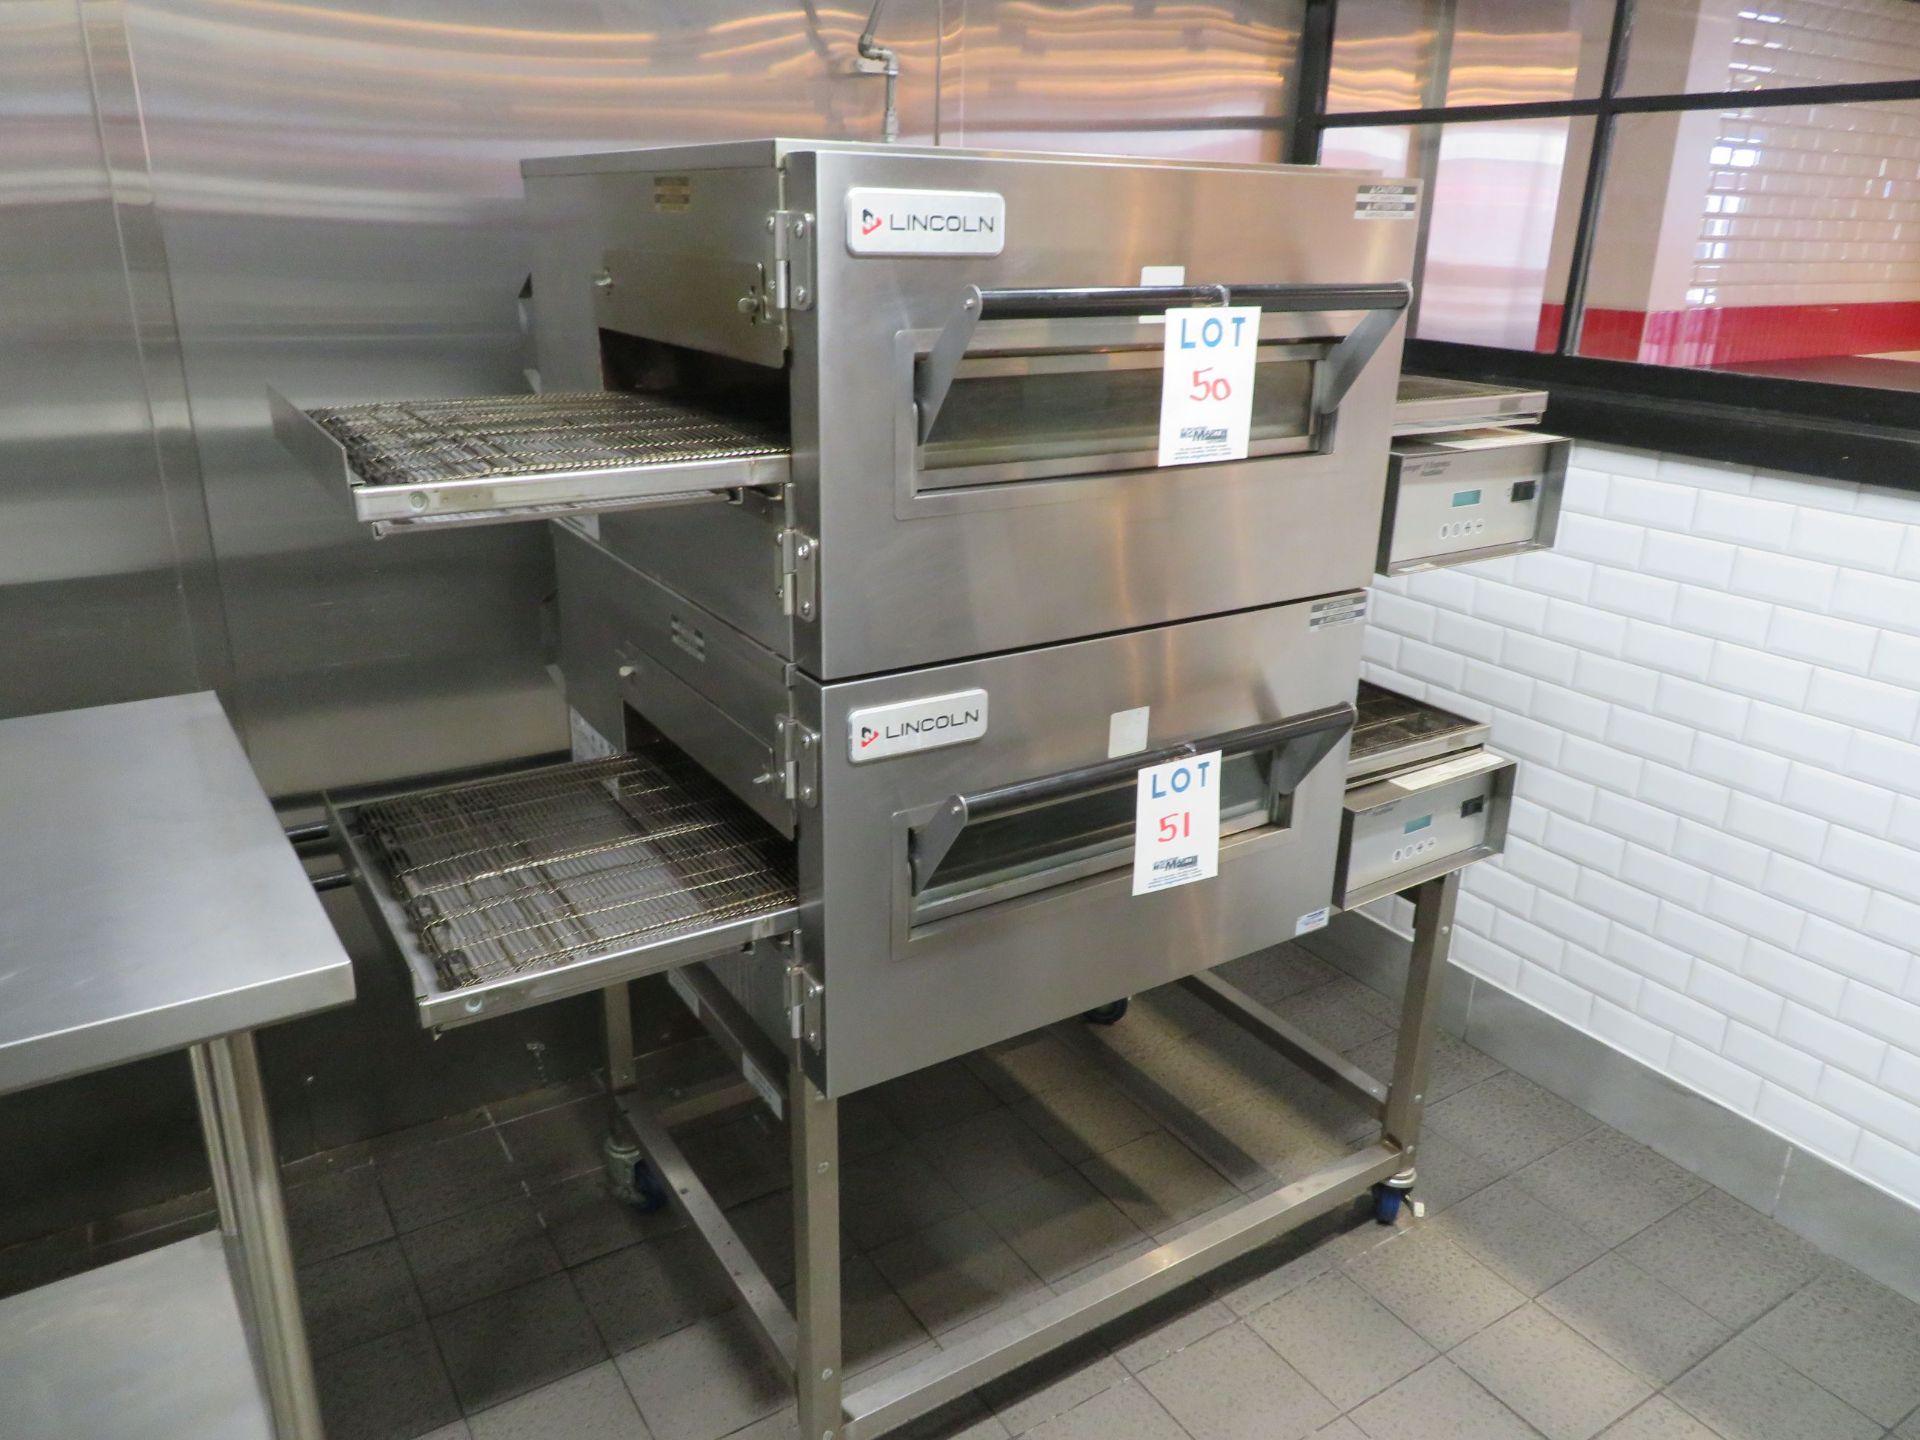 LINCOLN stainless steel pizza gas oven with conveyor (18"wide x 53" length), Mod: 1116-000- - Image 7 of 8